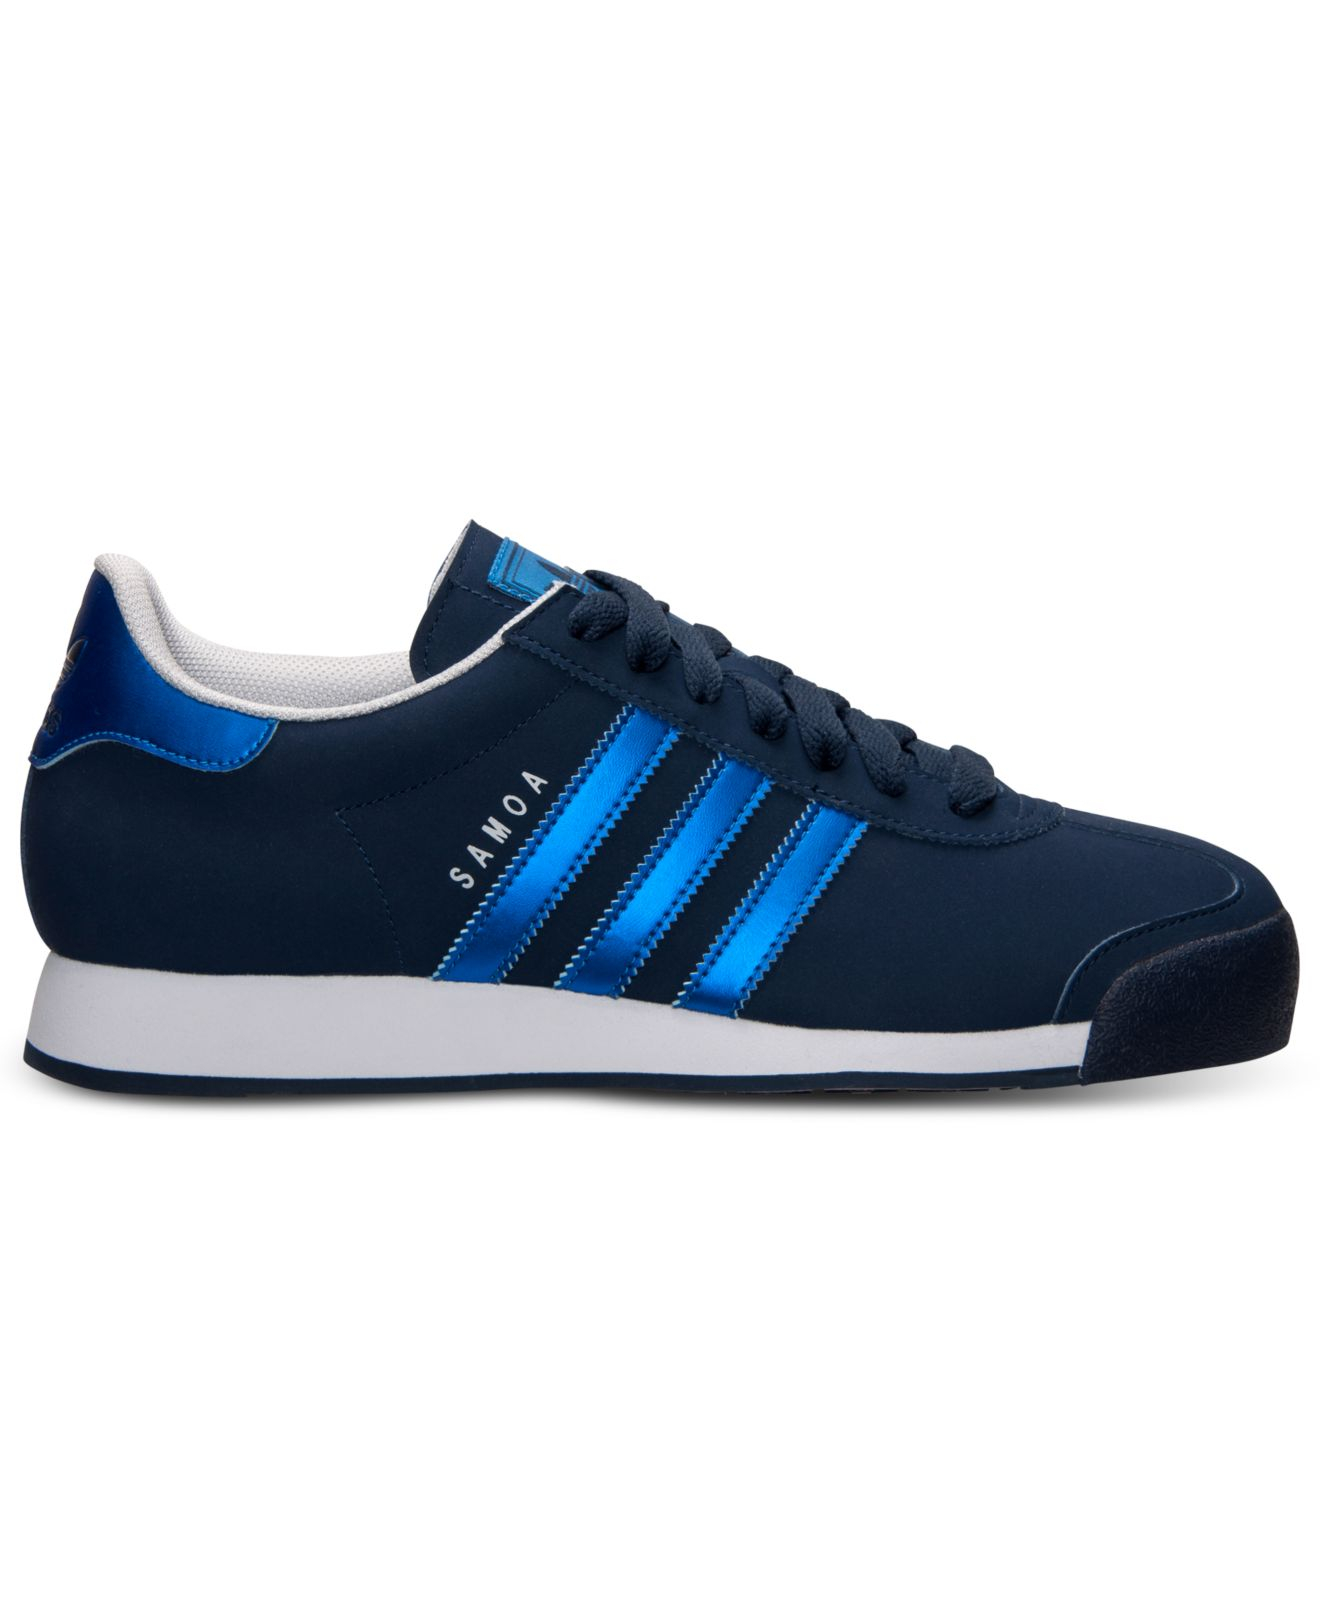 adidas Men'S Samoa Casual Sneakers From Finish Line in Navy/Blue/White ...